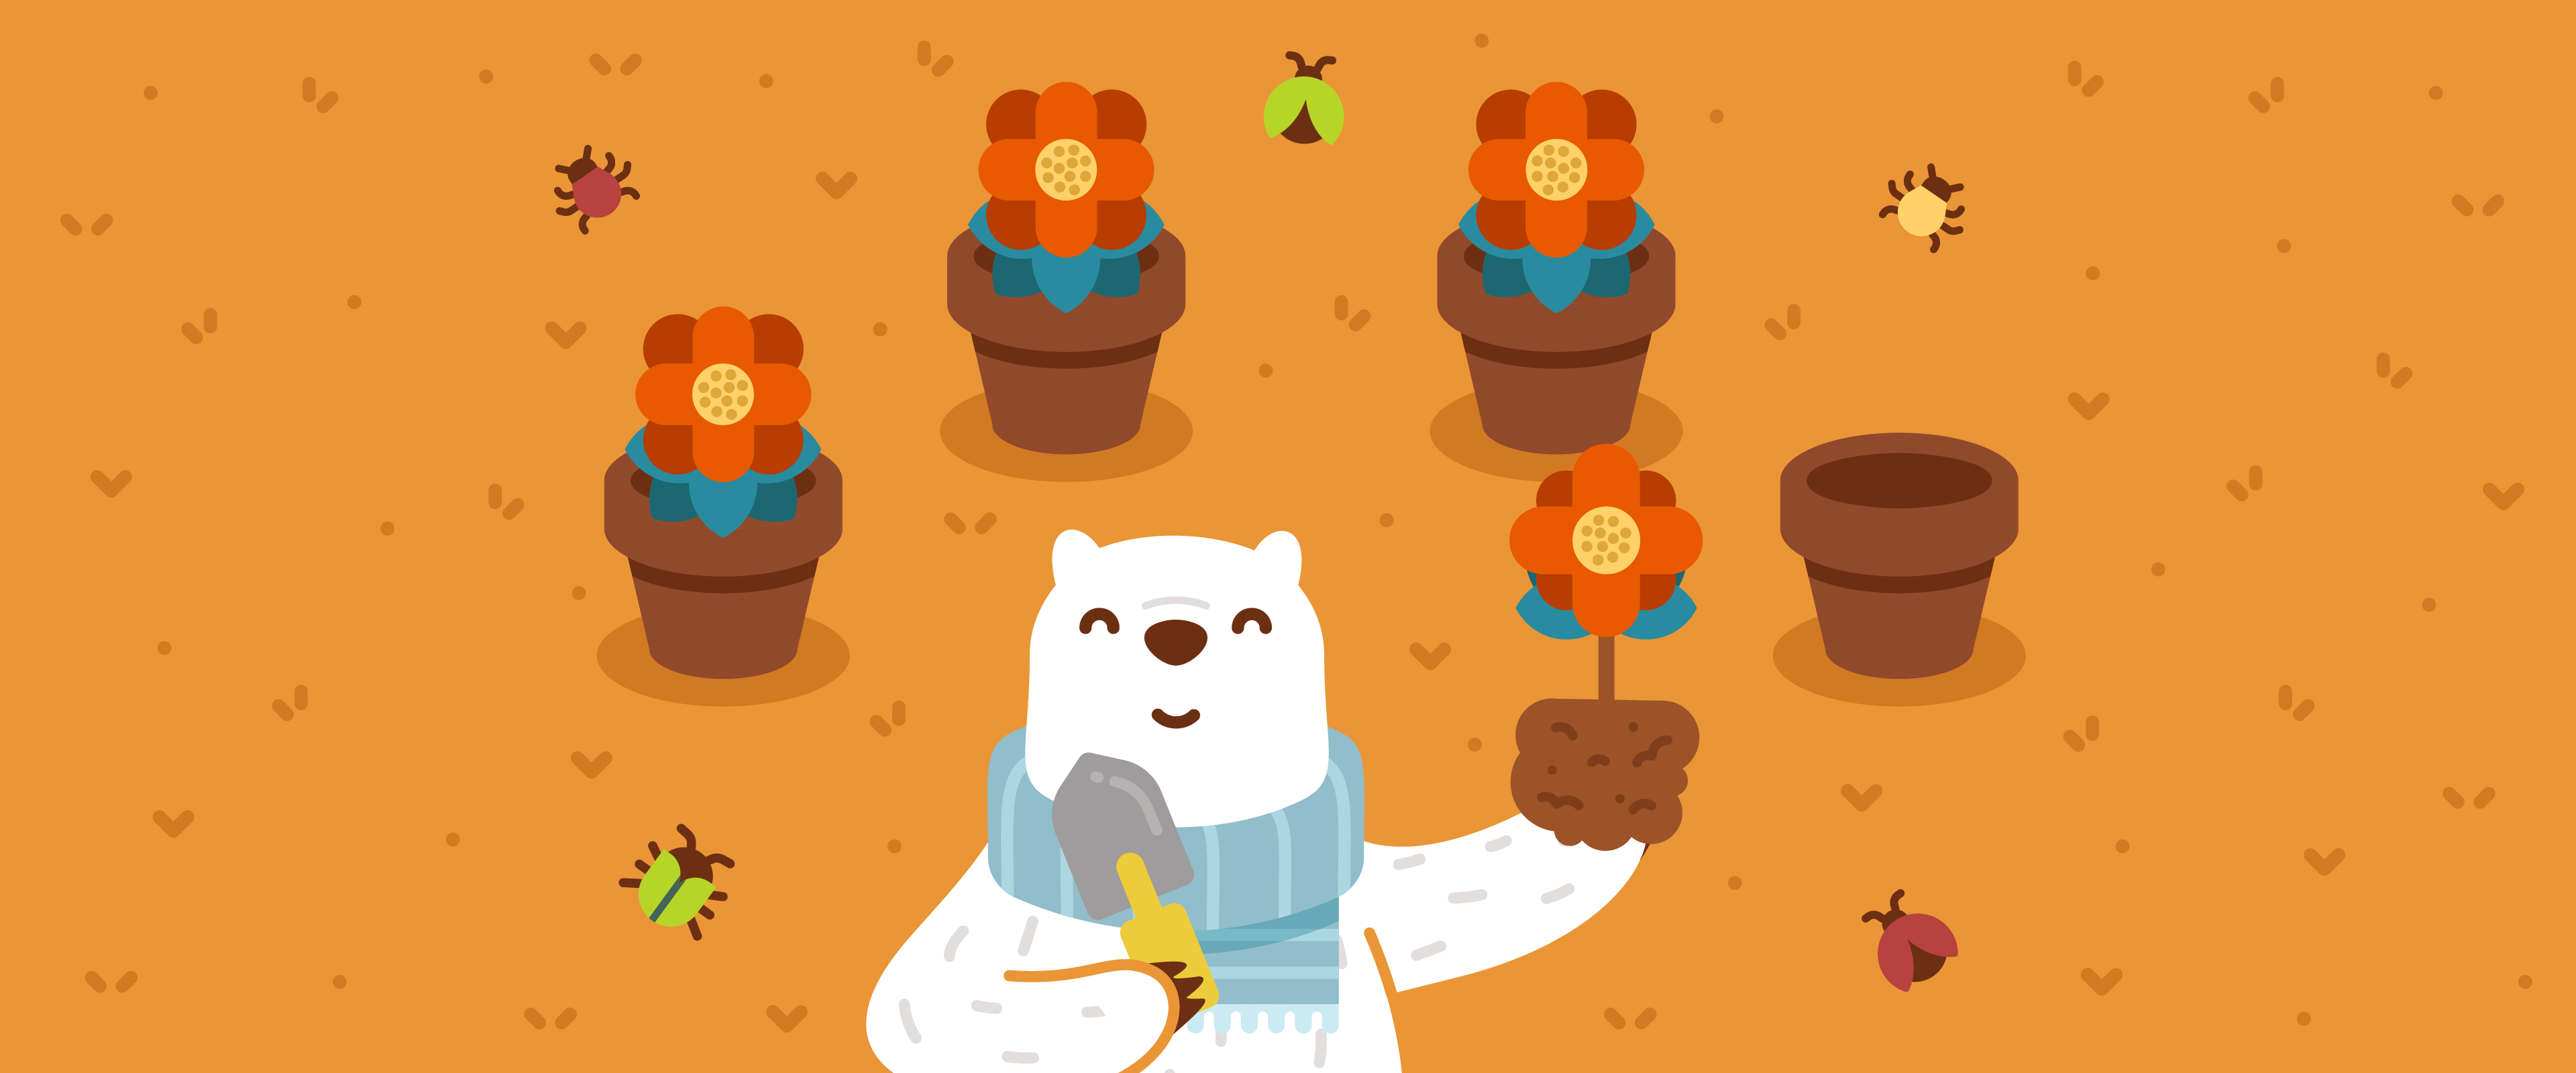 Bear Themed Wallpaper for your iPhone, iPad, and Mac